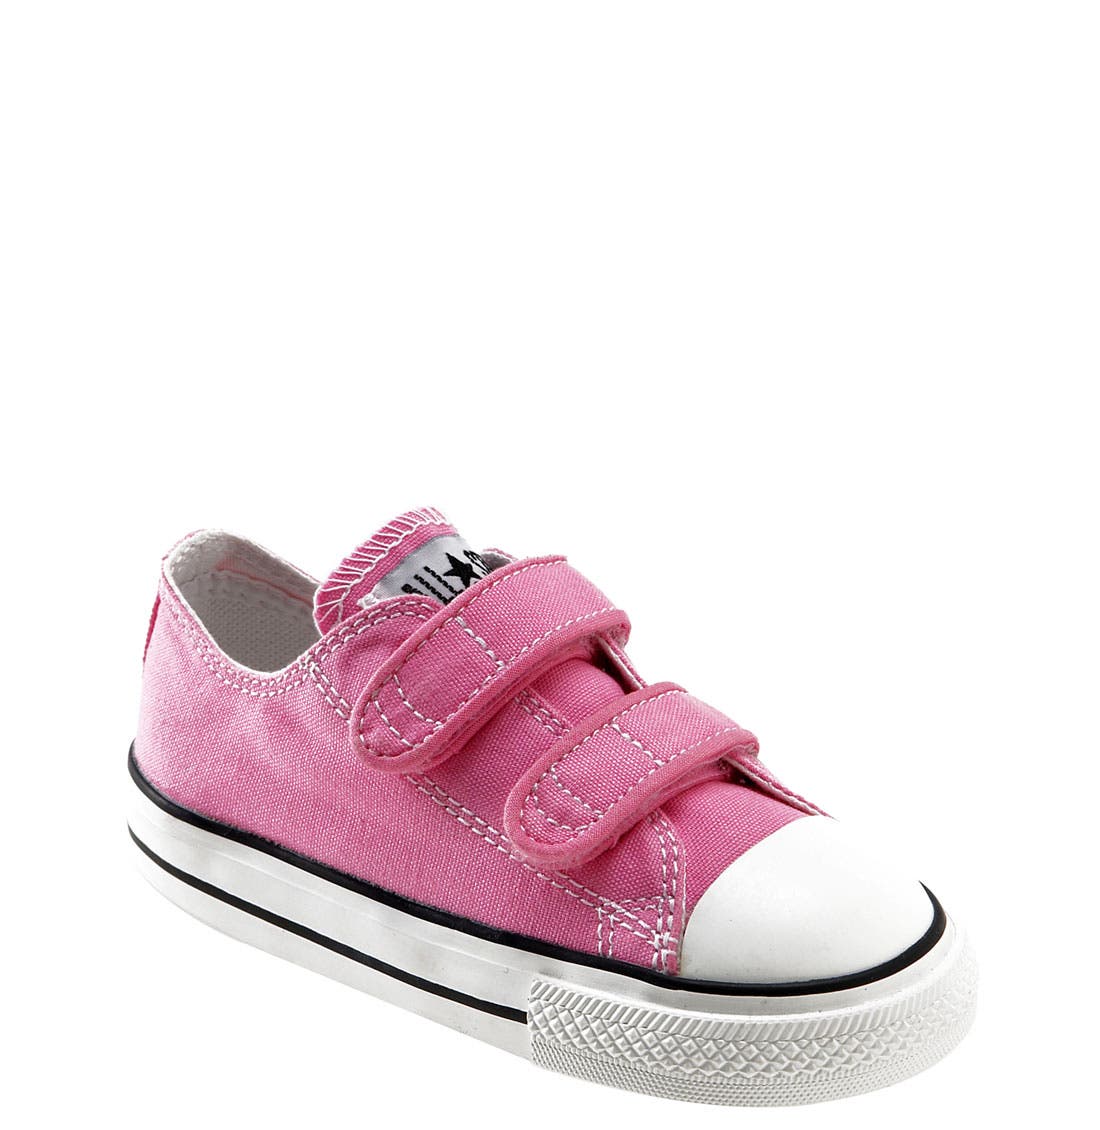 toddler size 4 converse shoes